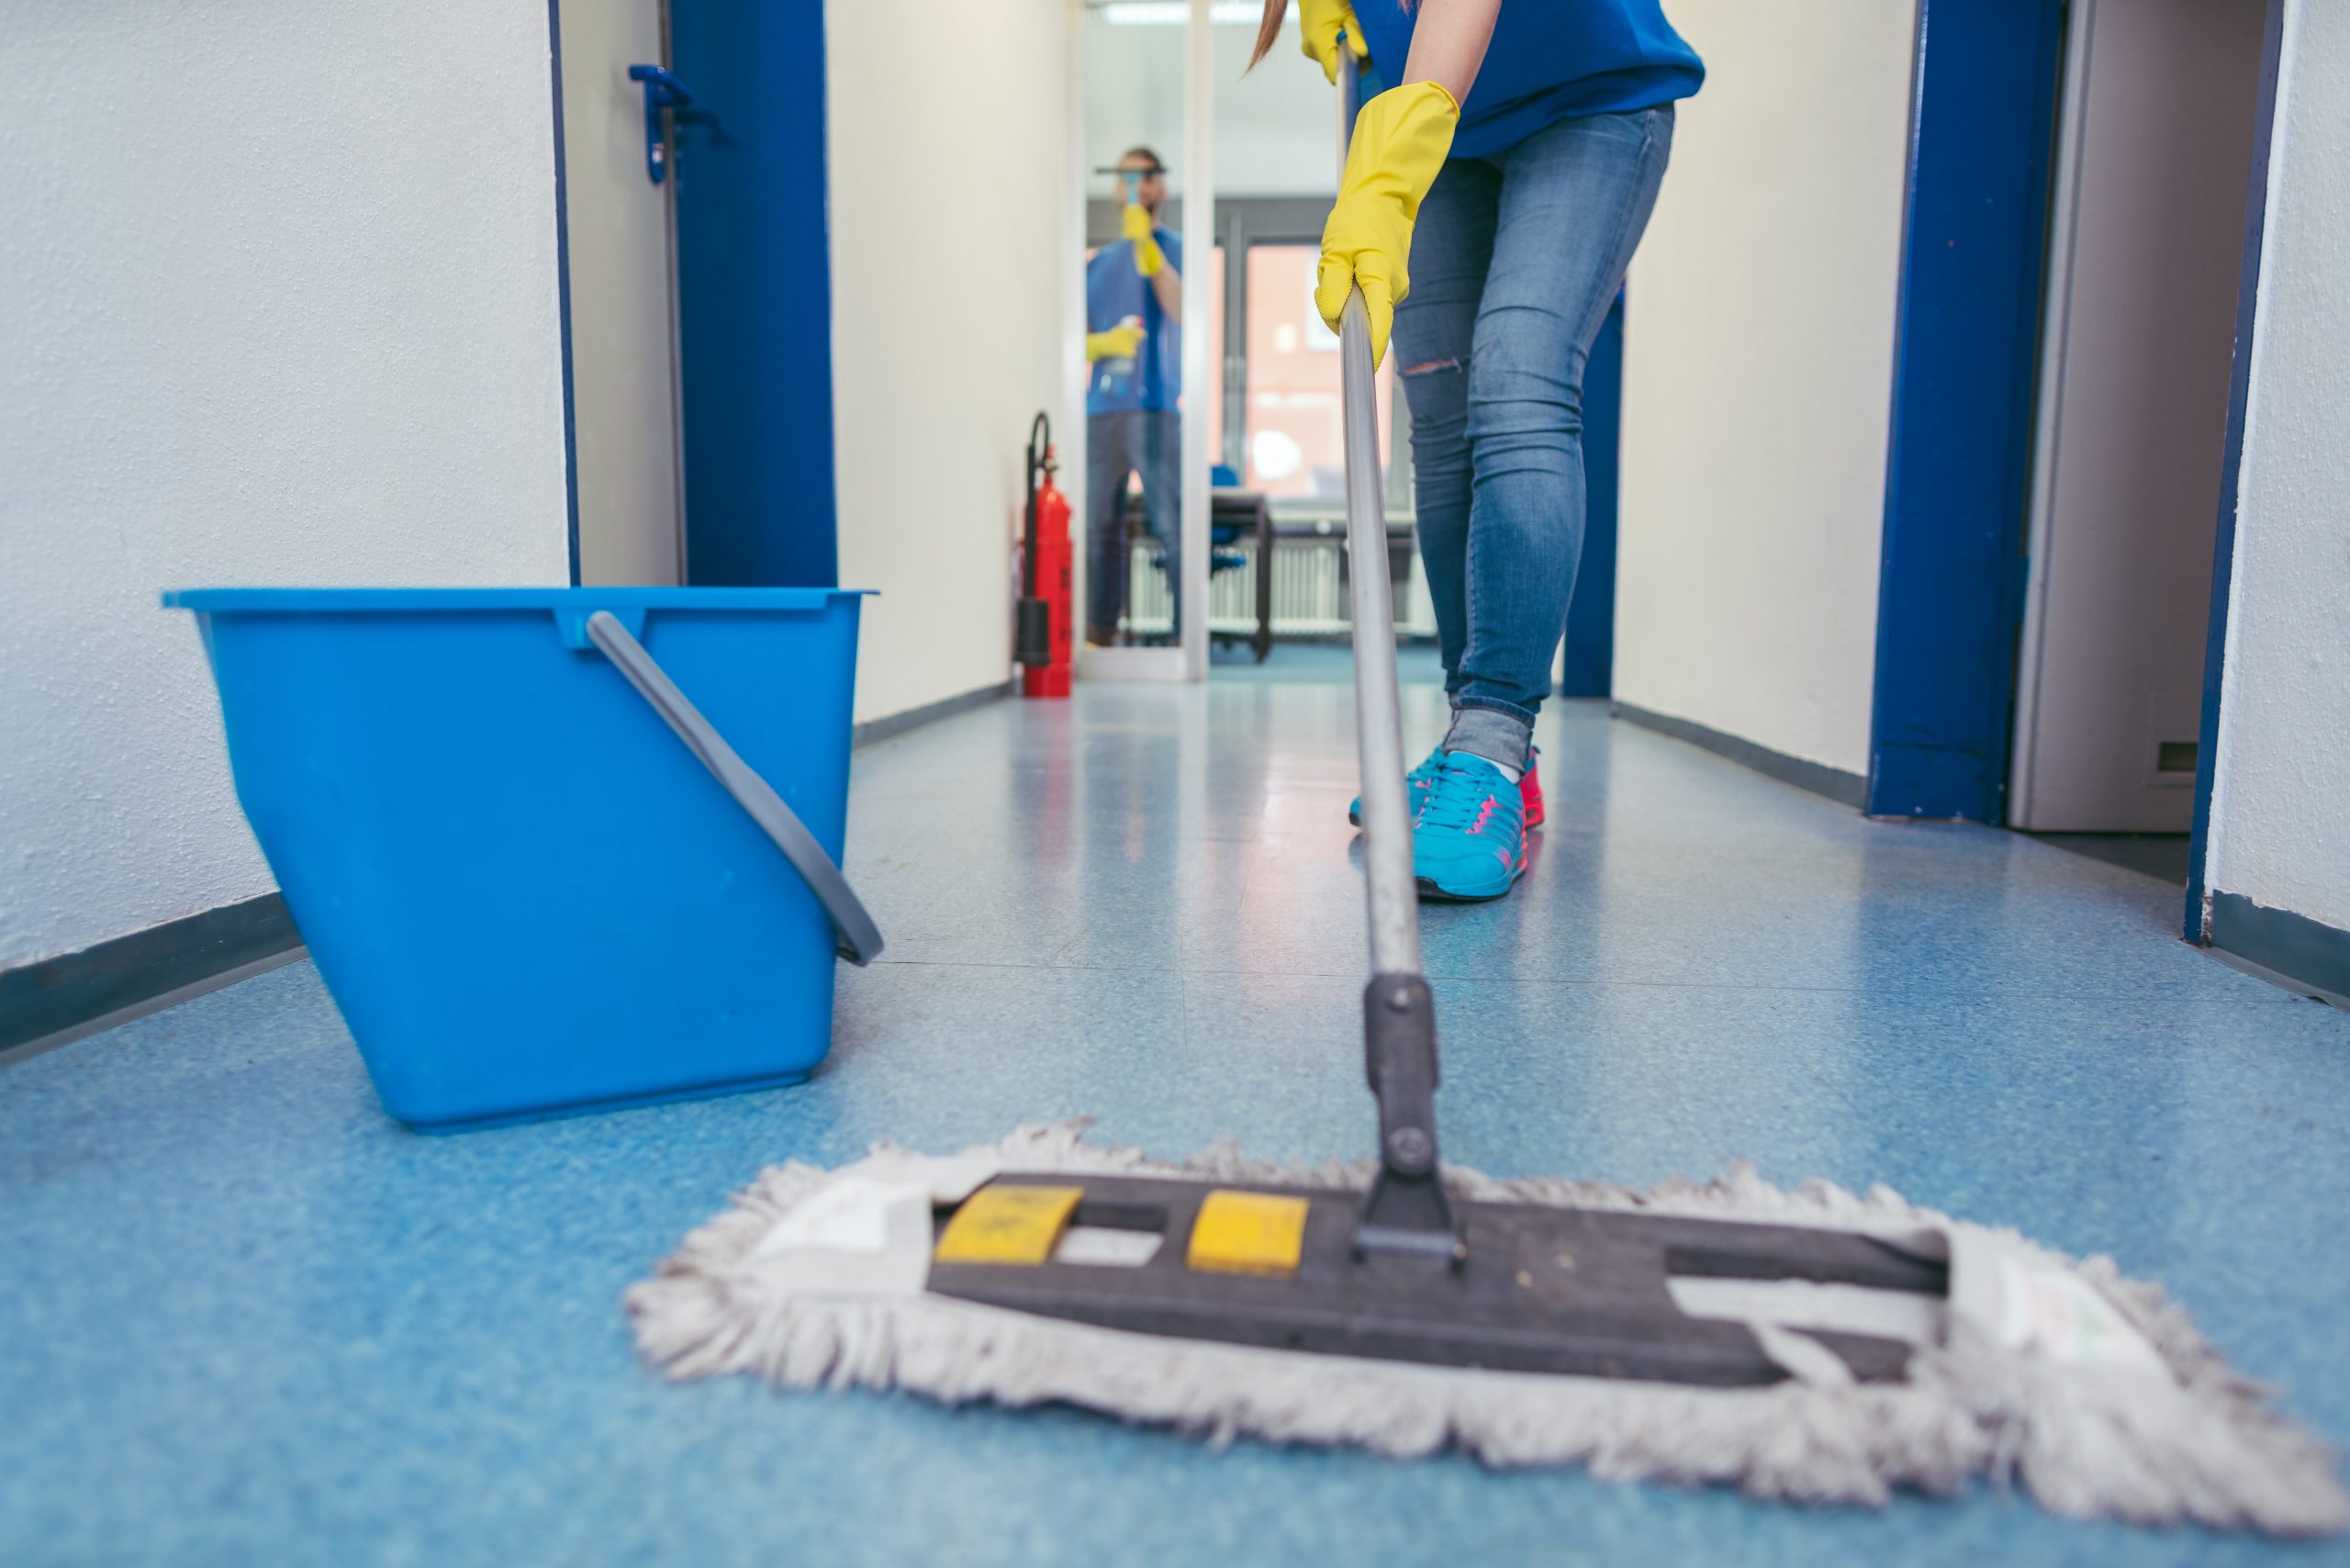 How long does it take to clean a 3,000 square foot office?